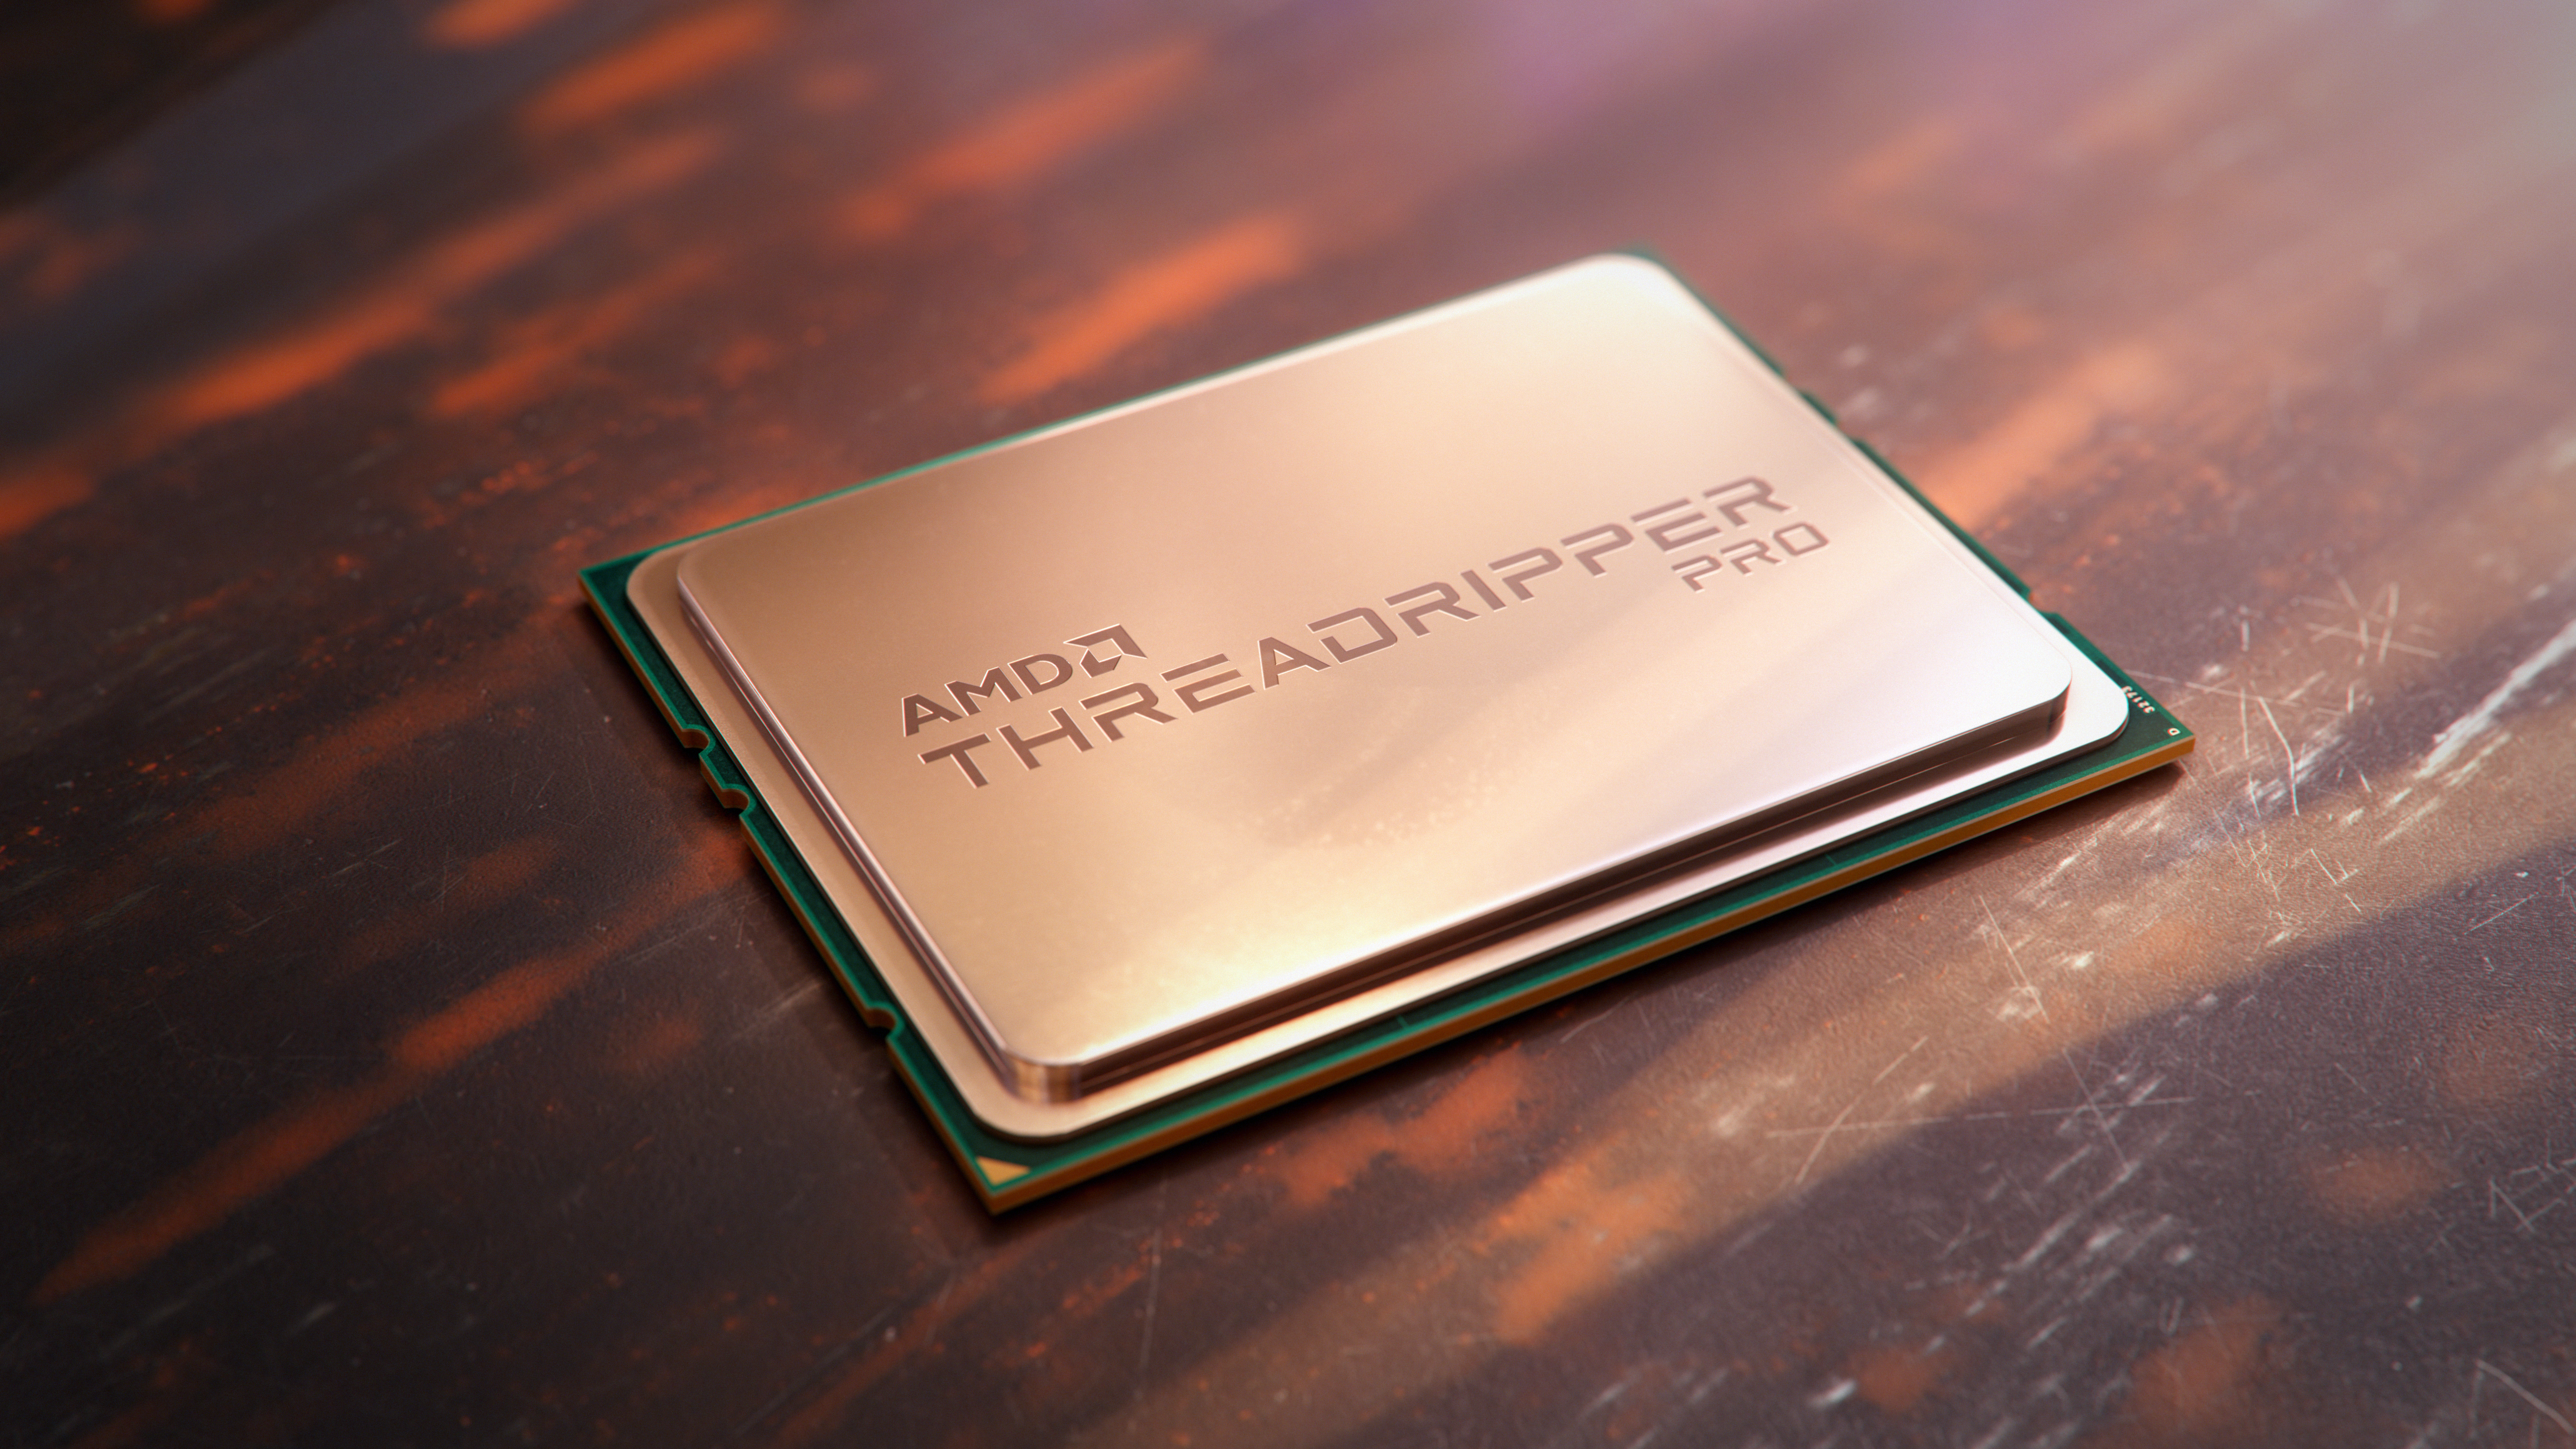 An artistic render of the AMD Threadripper PRO processor sitting on a wooden table.